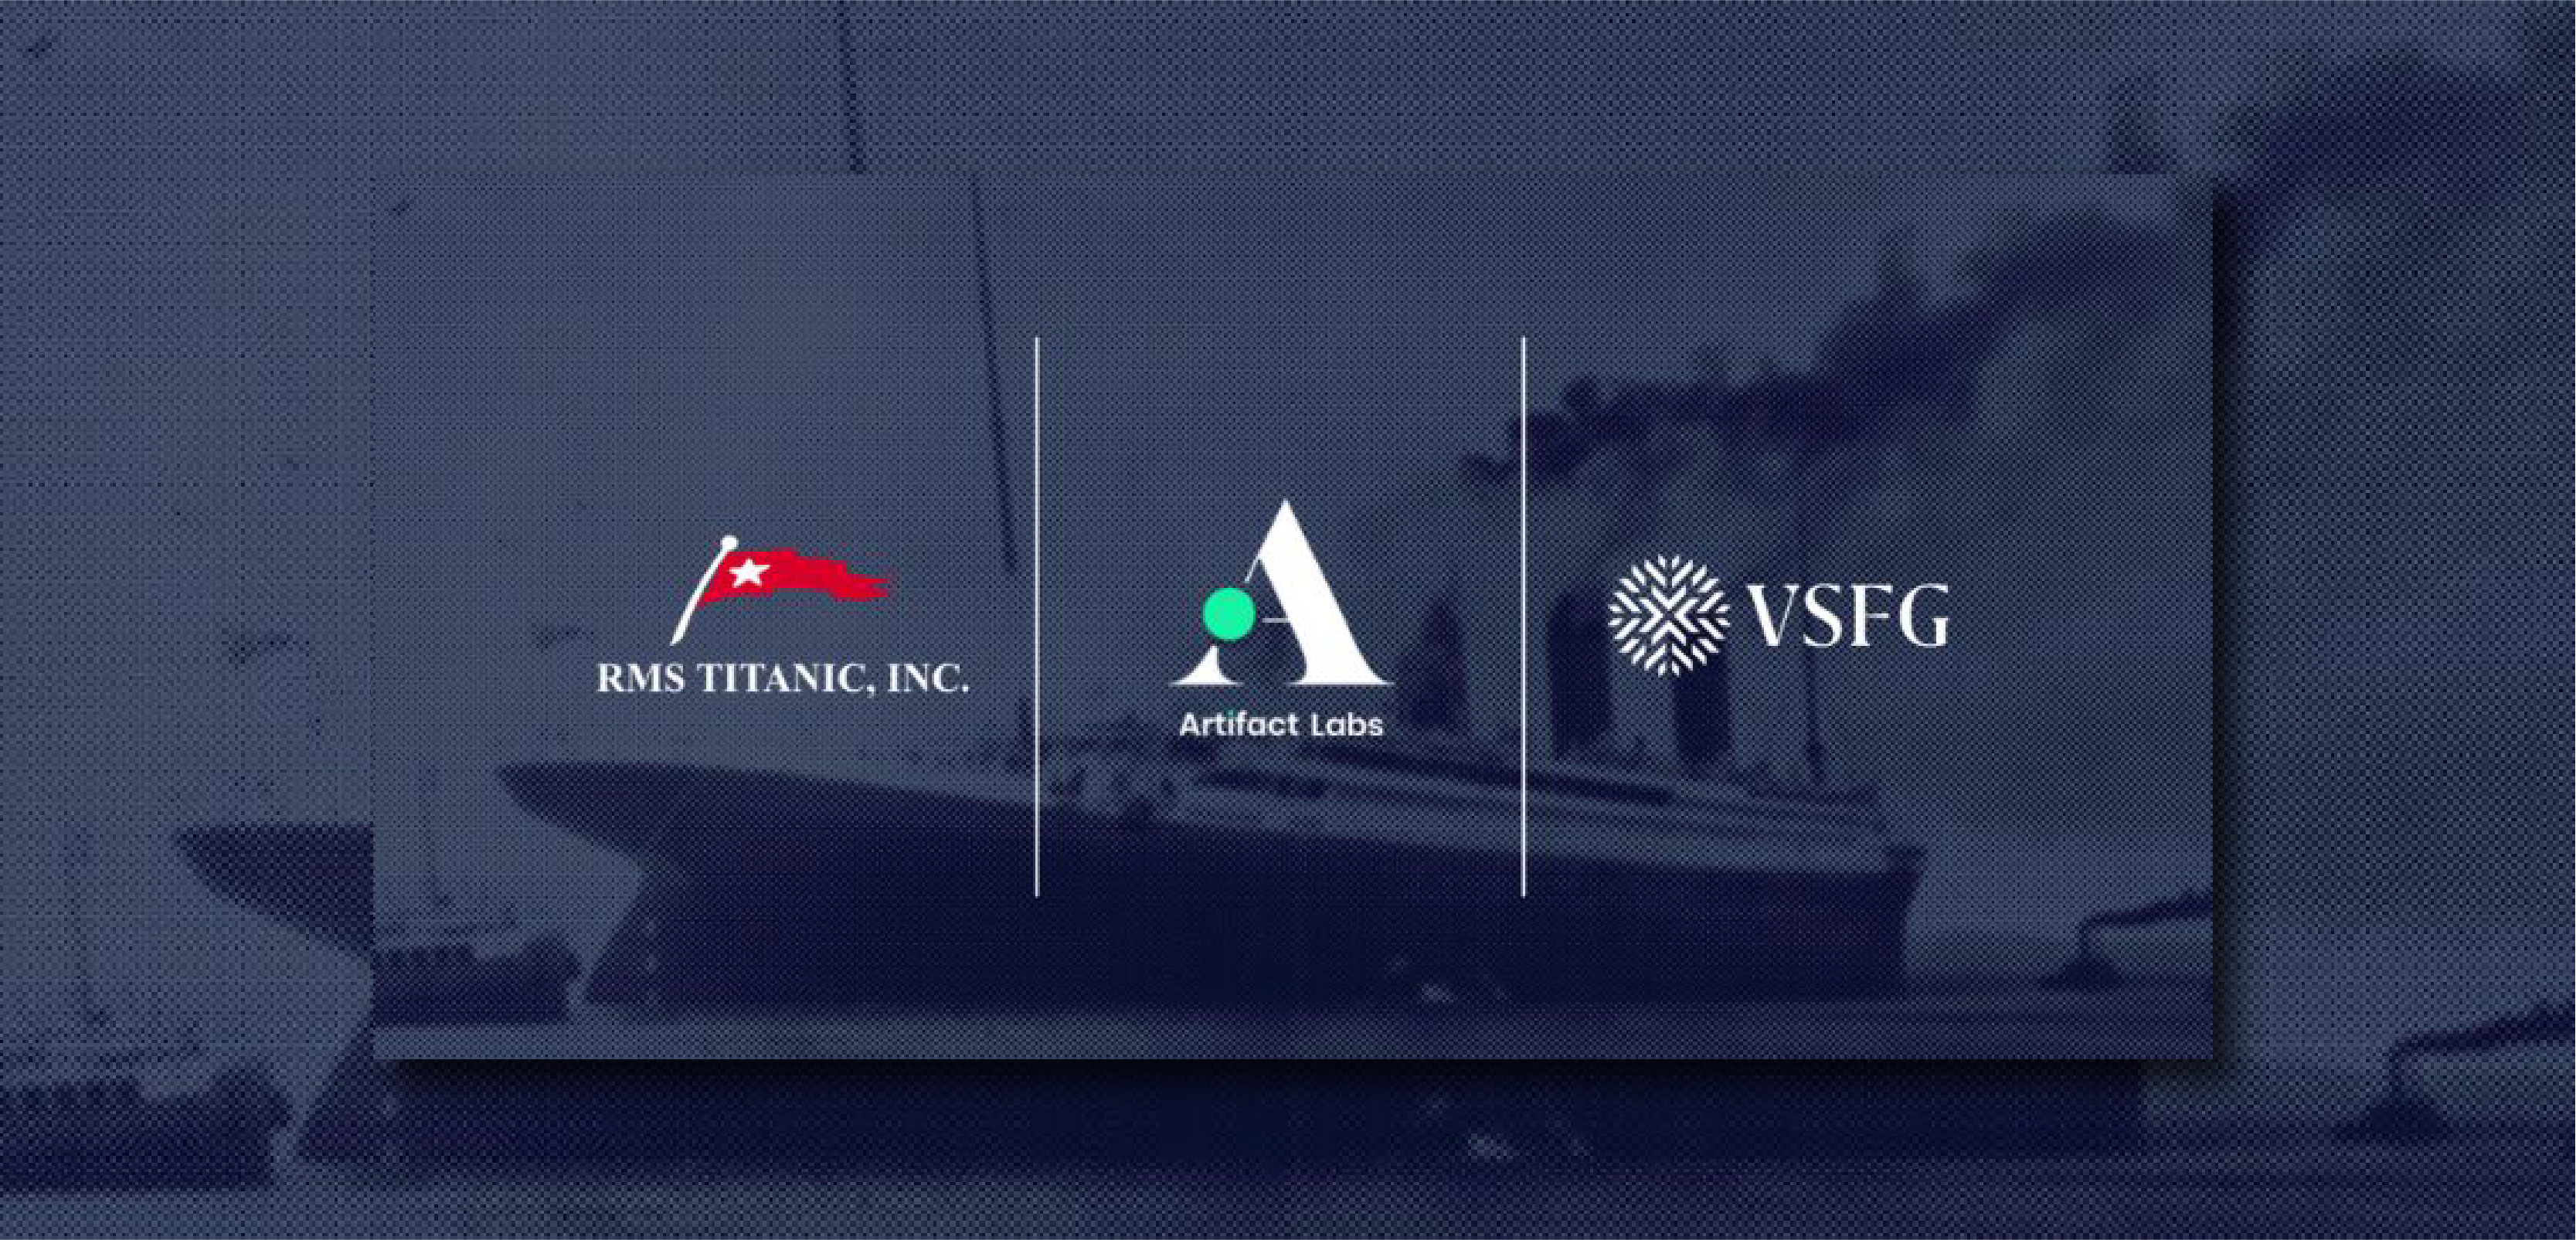 rms-titanic-inc-vsfg-and-artifact-labs-partner-to-bring-the-titanic-into-web3